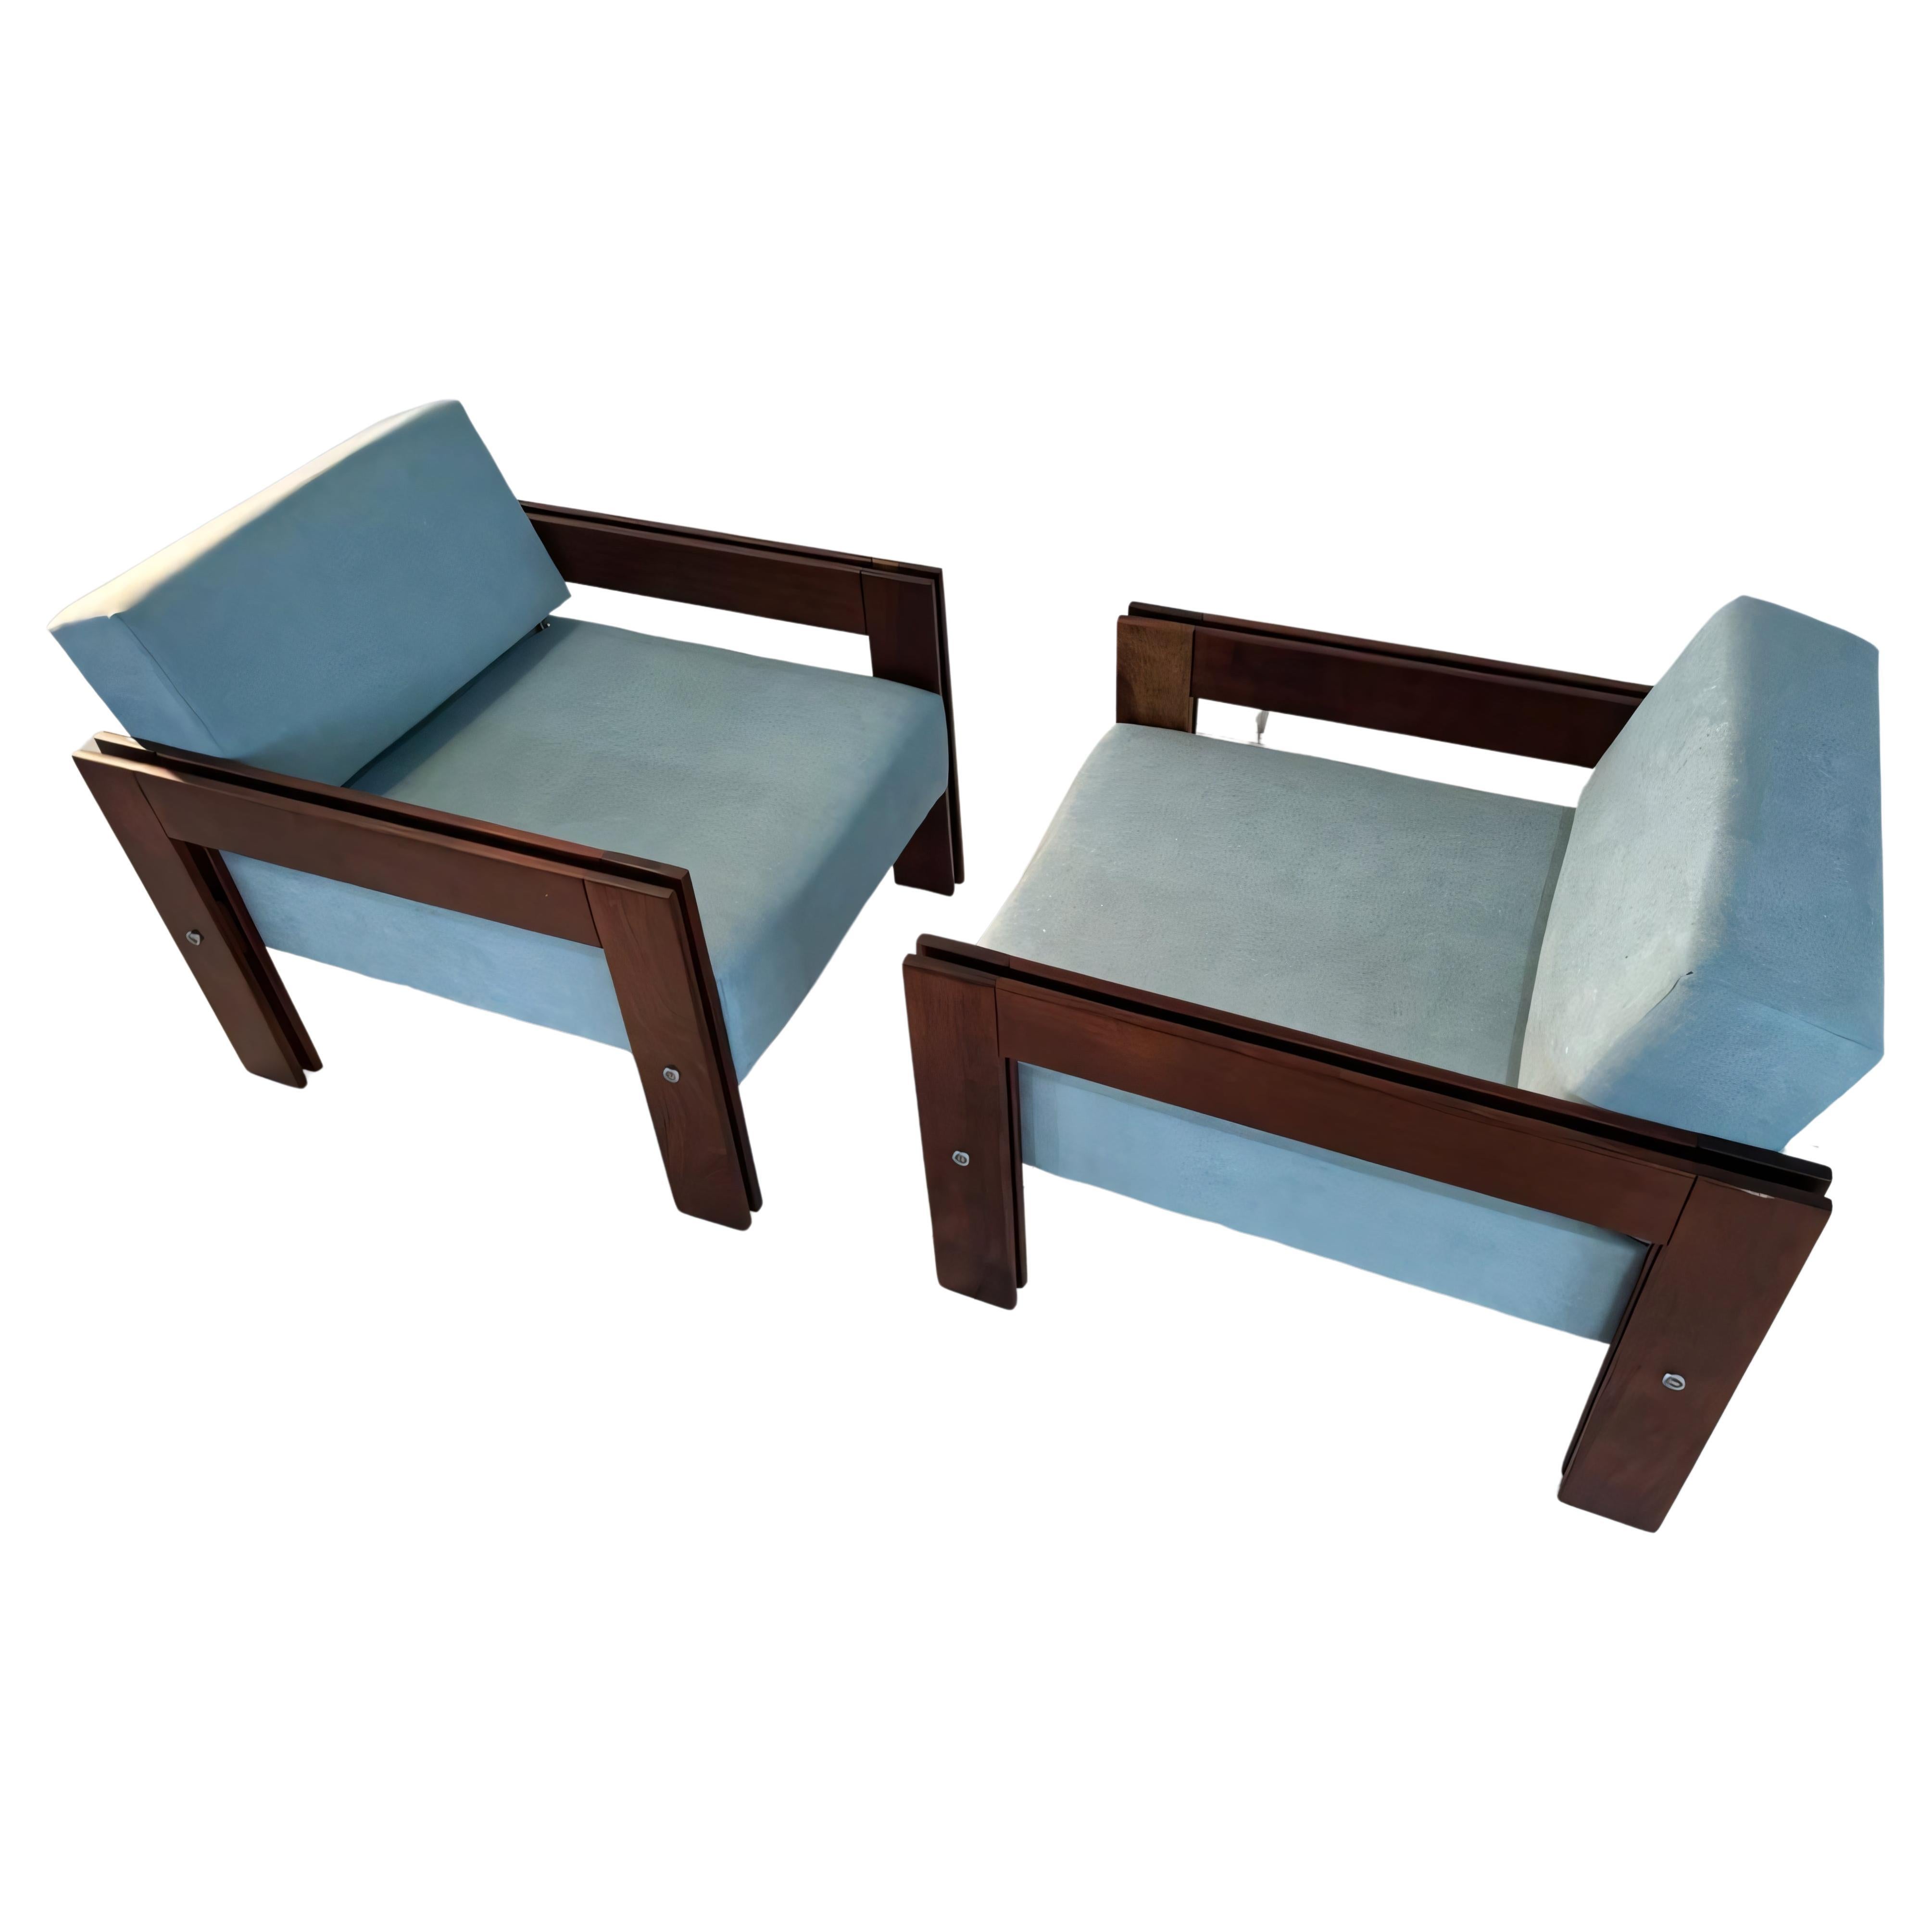 Percival Lafer - MP-85 , 2 Adjustable Lounge Chairs, Brazil 1971 For Sale